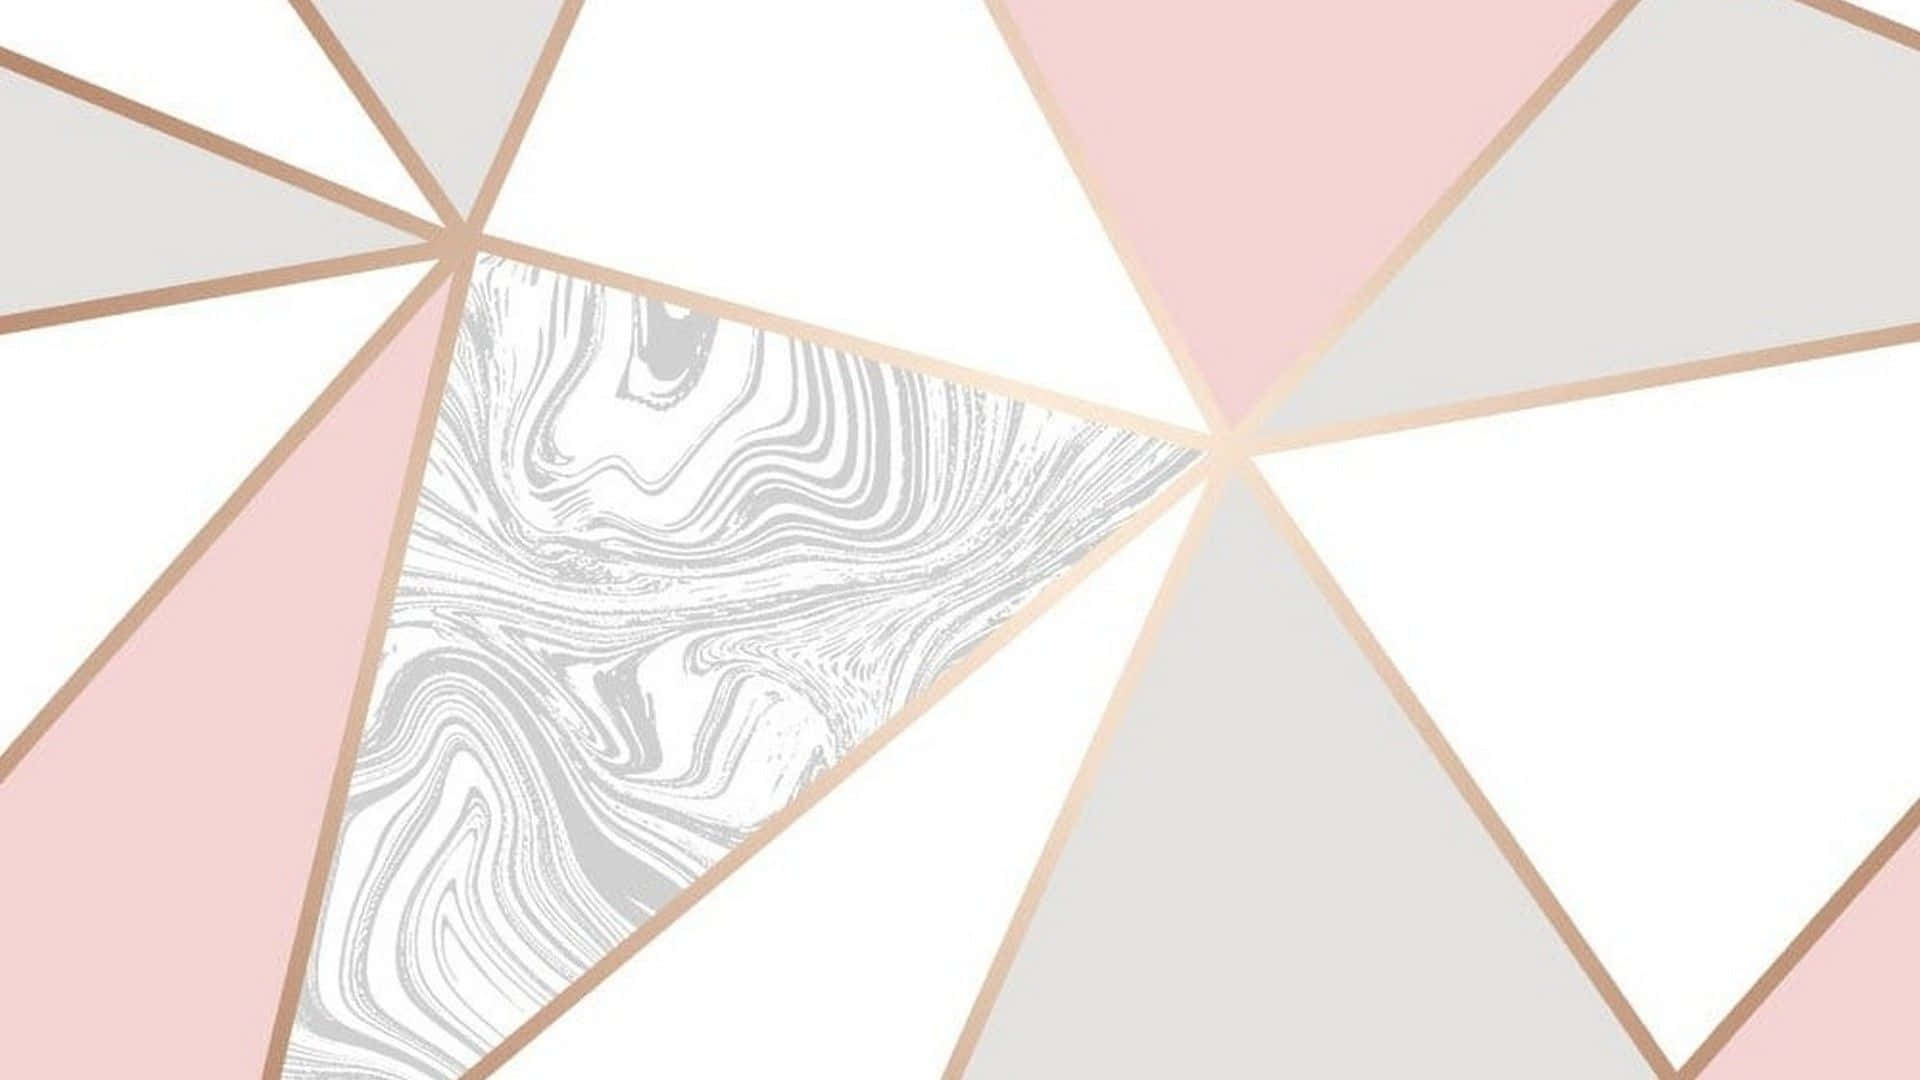 A beautiful abstract design of rose gold